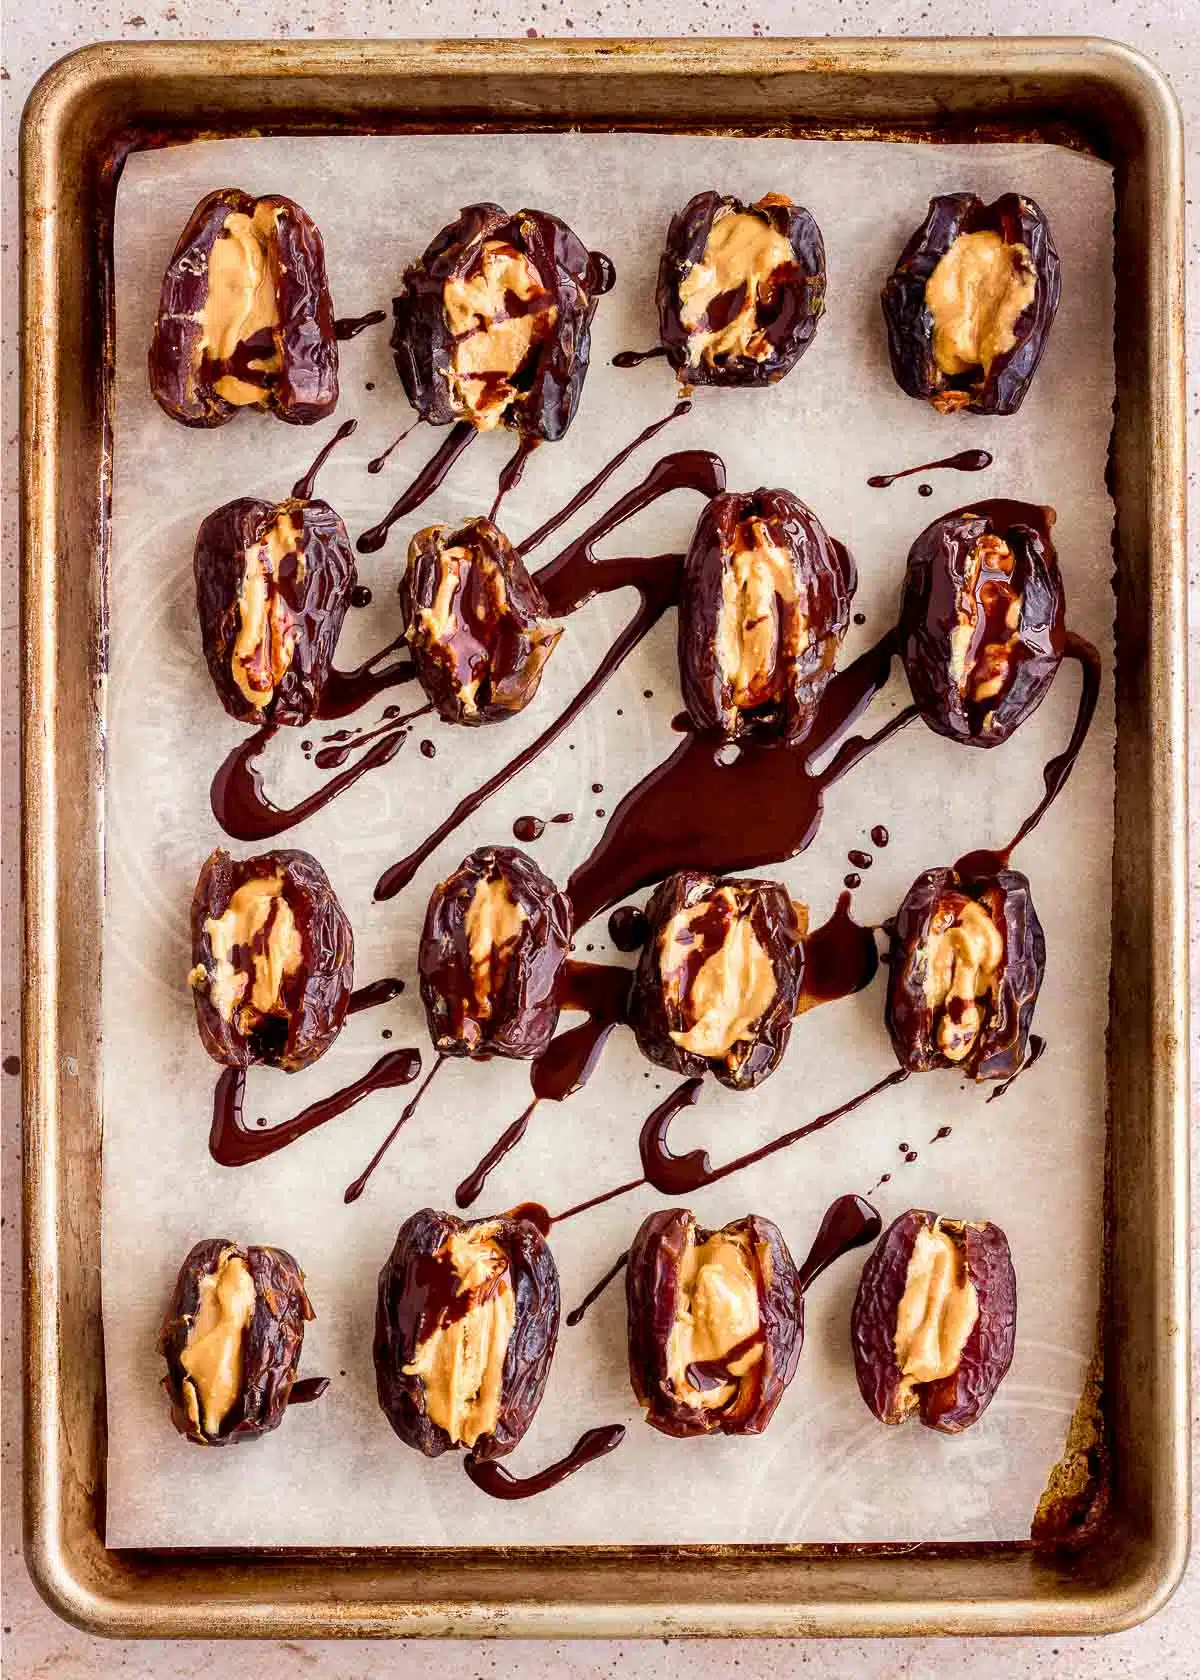 Dates stuffed with peanut butter and drizzled with chocolate on a baking tray.